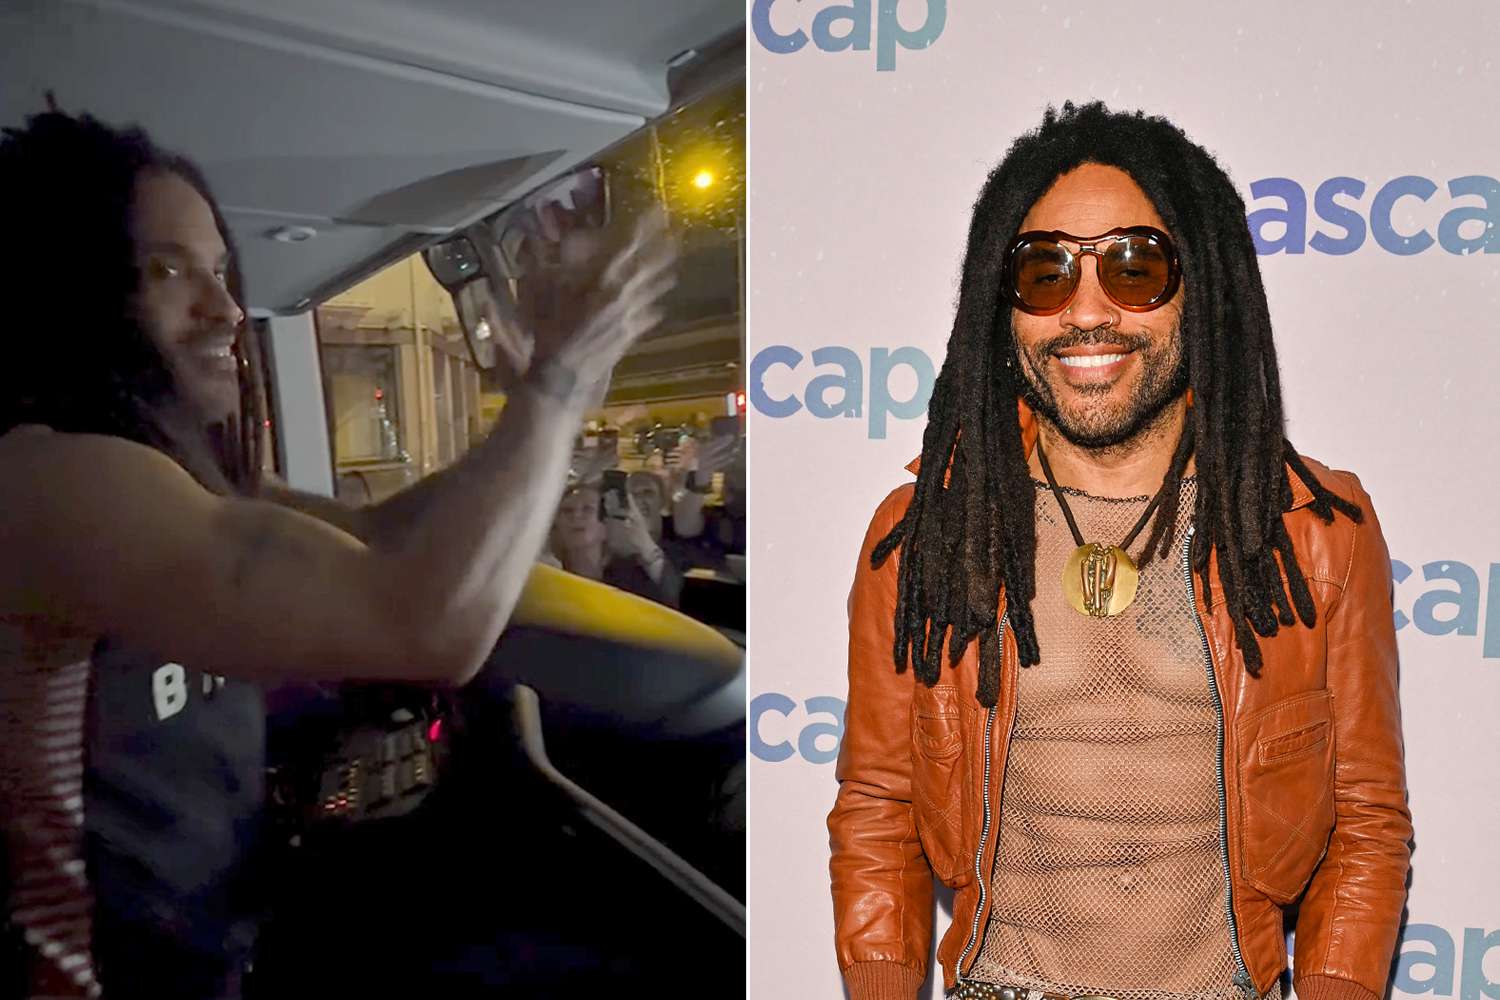 Lenny Kravitz Lifts Up and Hugs Crying Fan at Music Festival: 'Let Love Rule'